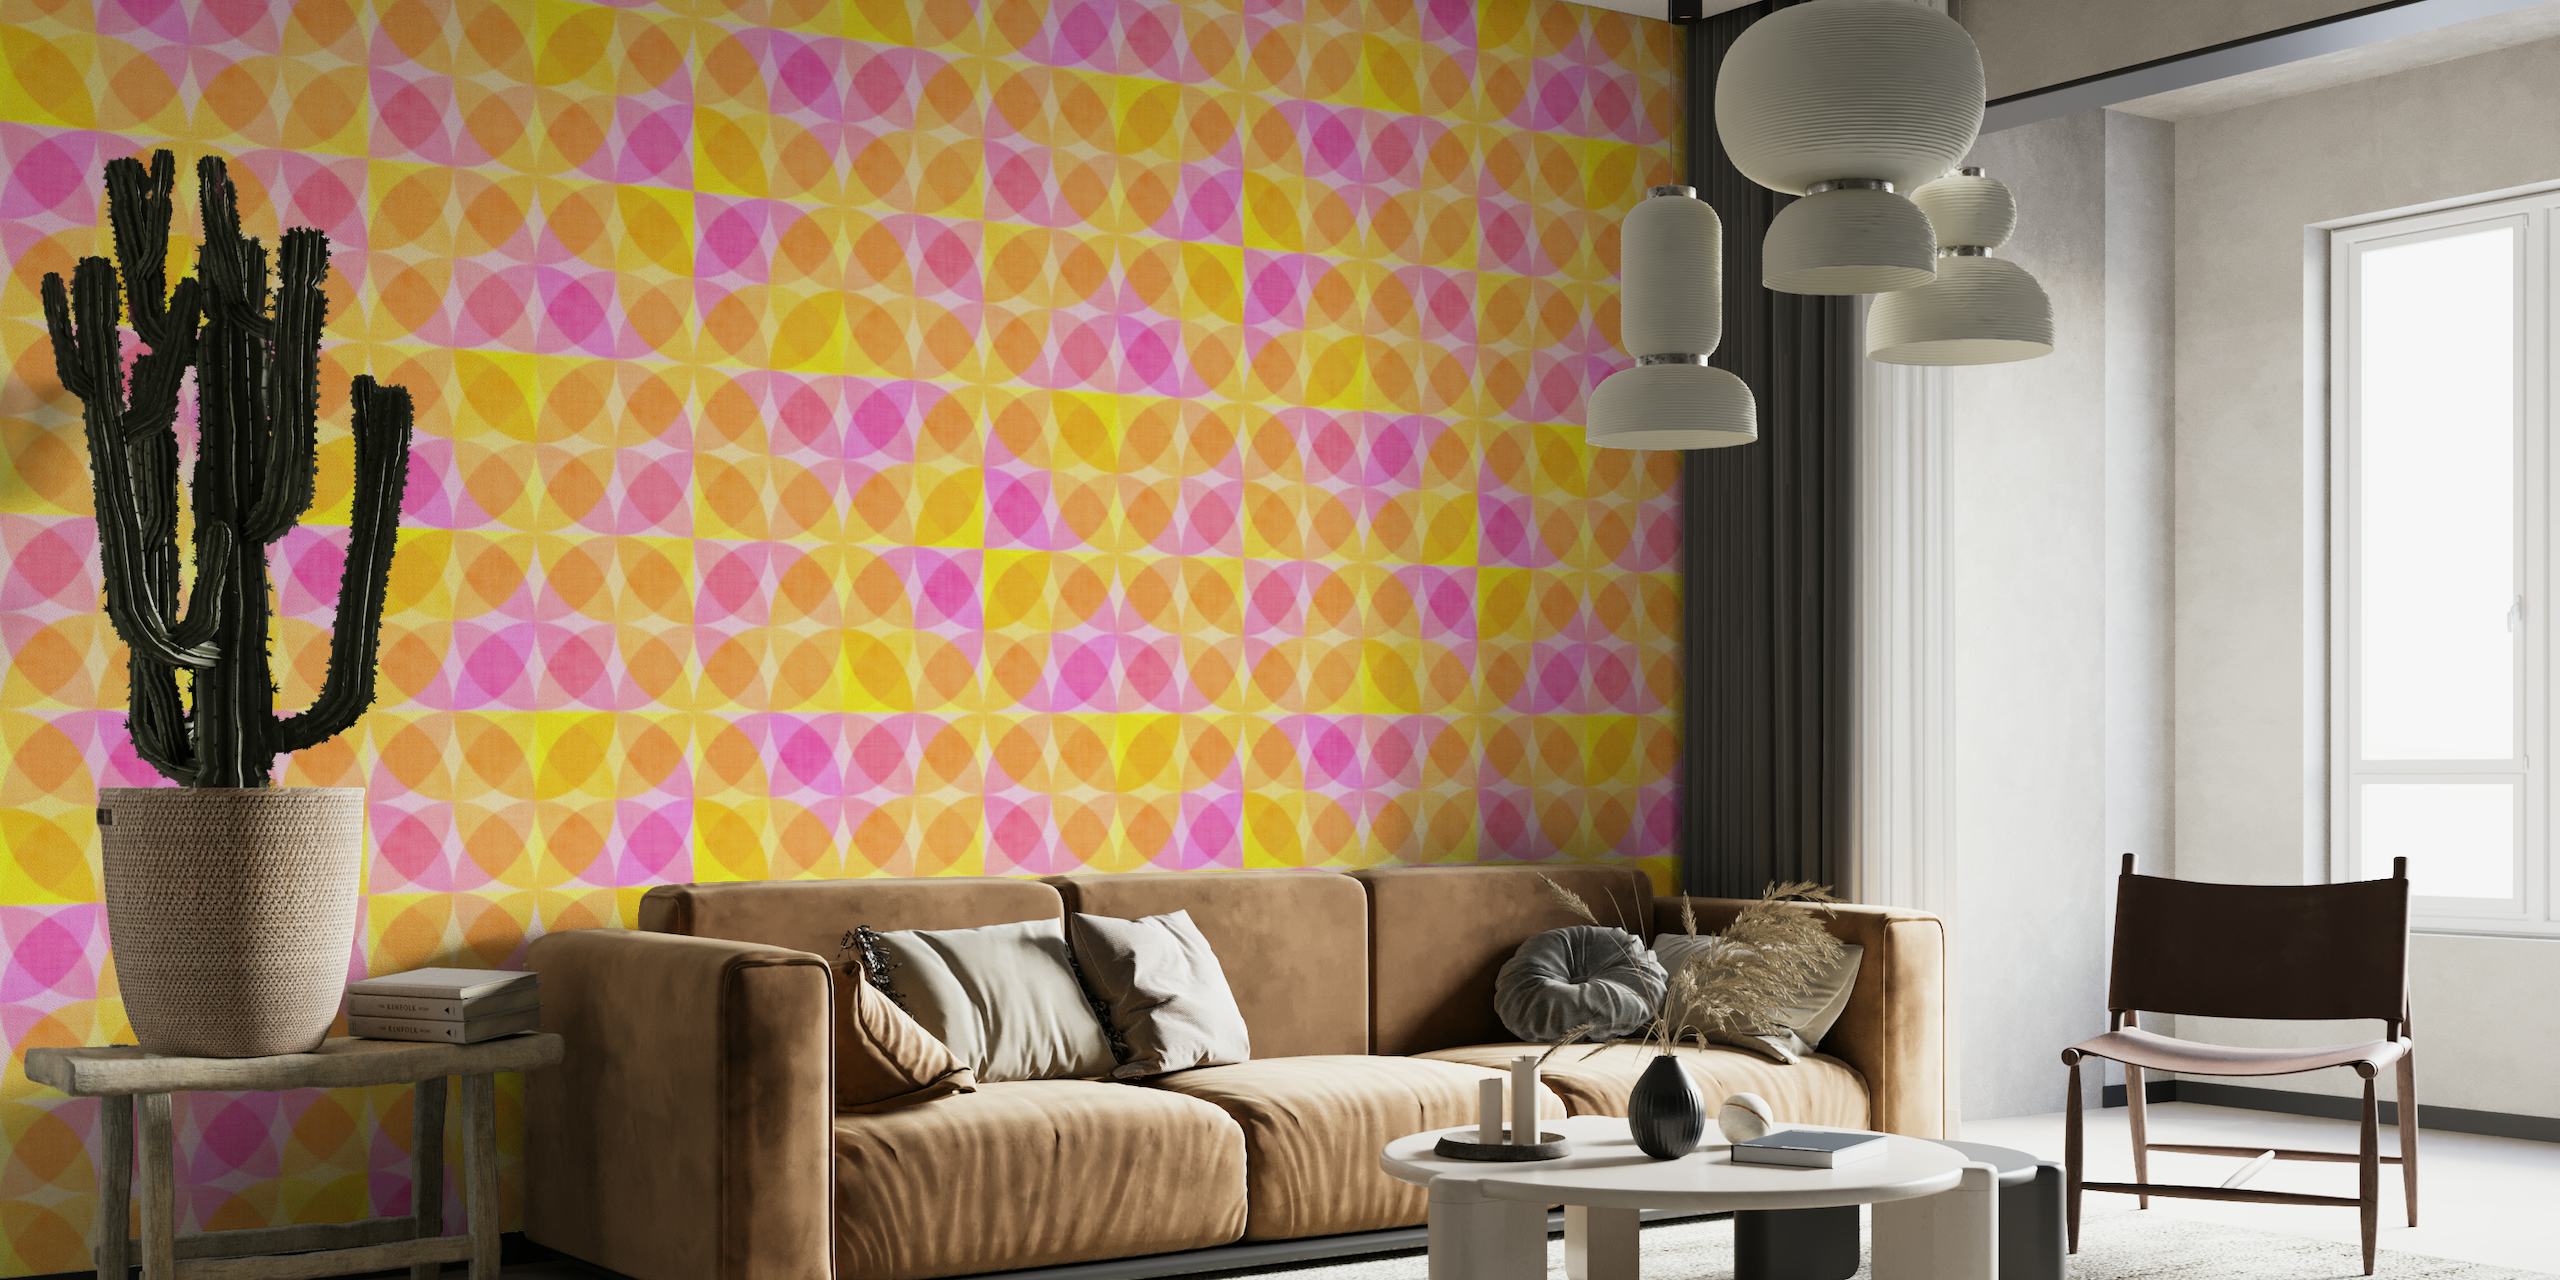 Party Geometric Shapes Pink Orange and Yellow wallpaper